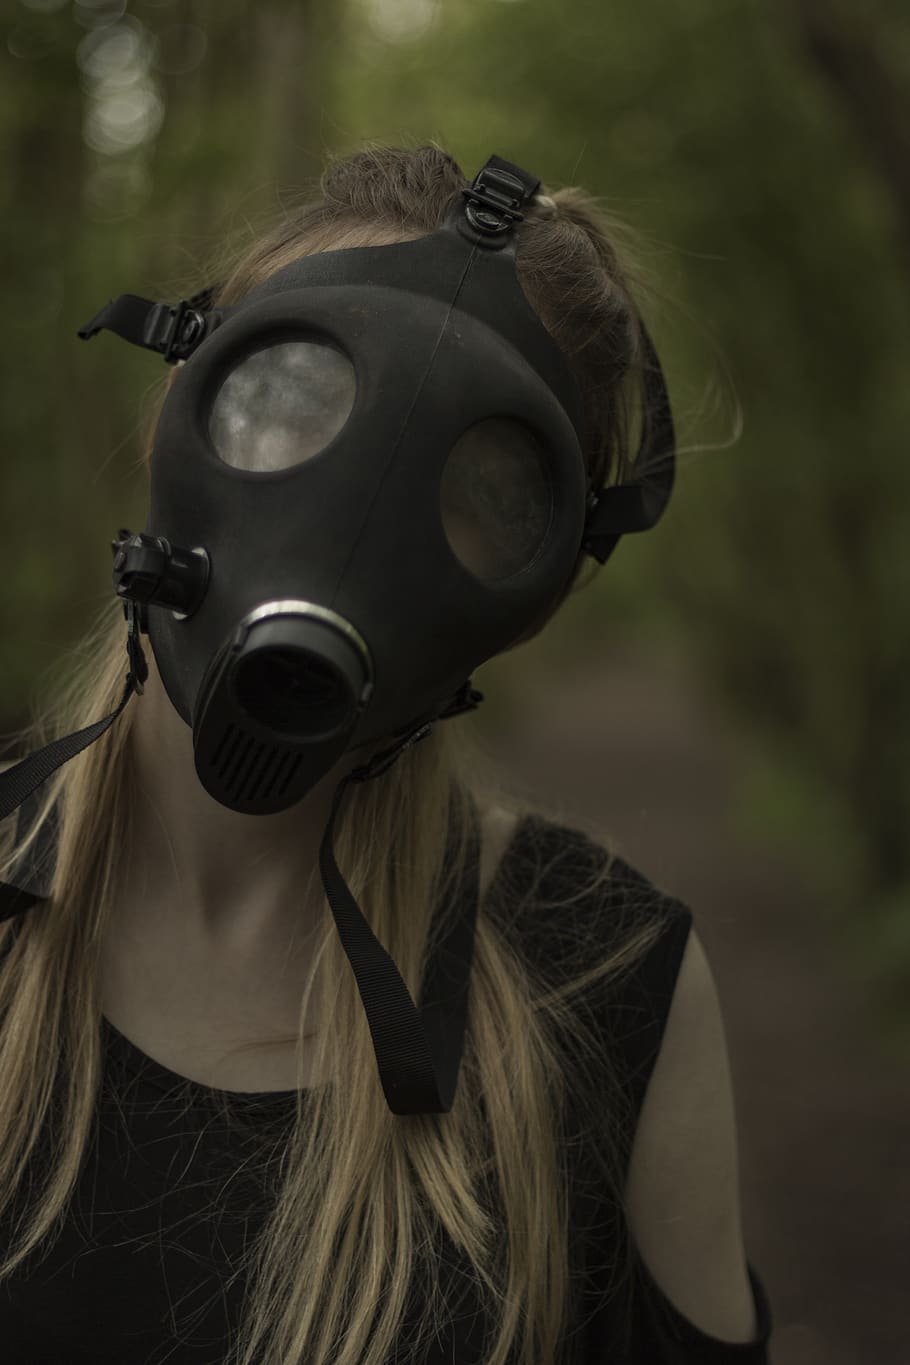 gas, mask, nuclear, apocalypse, woman, headshot, hair, portrait, one person, hairstyle